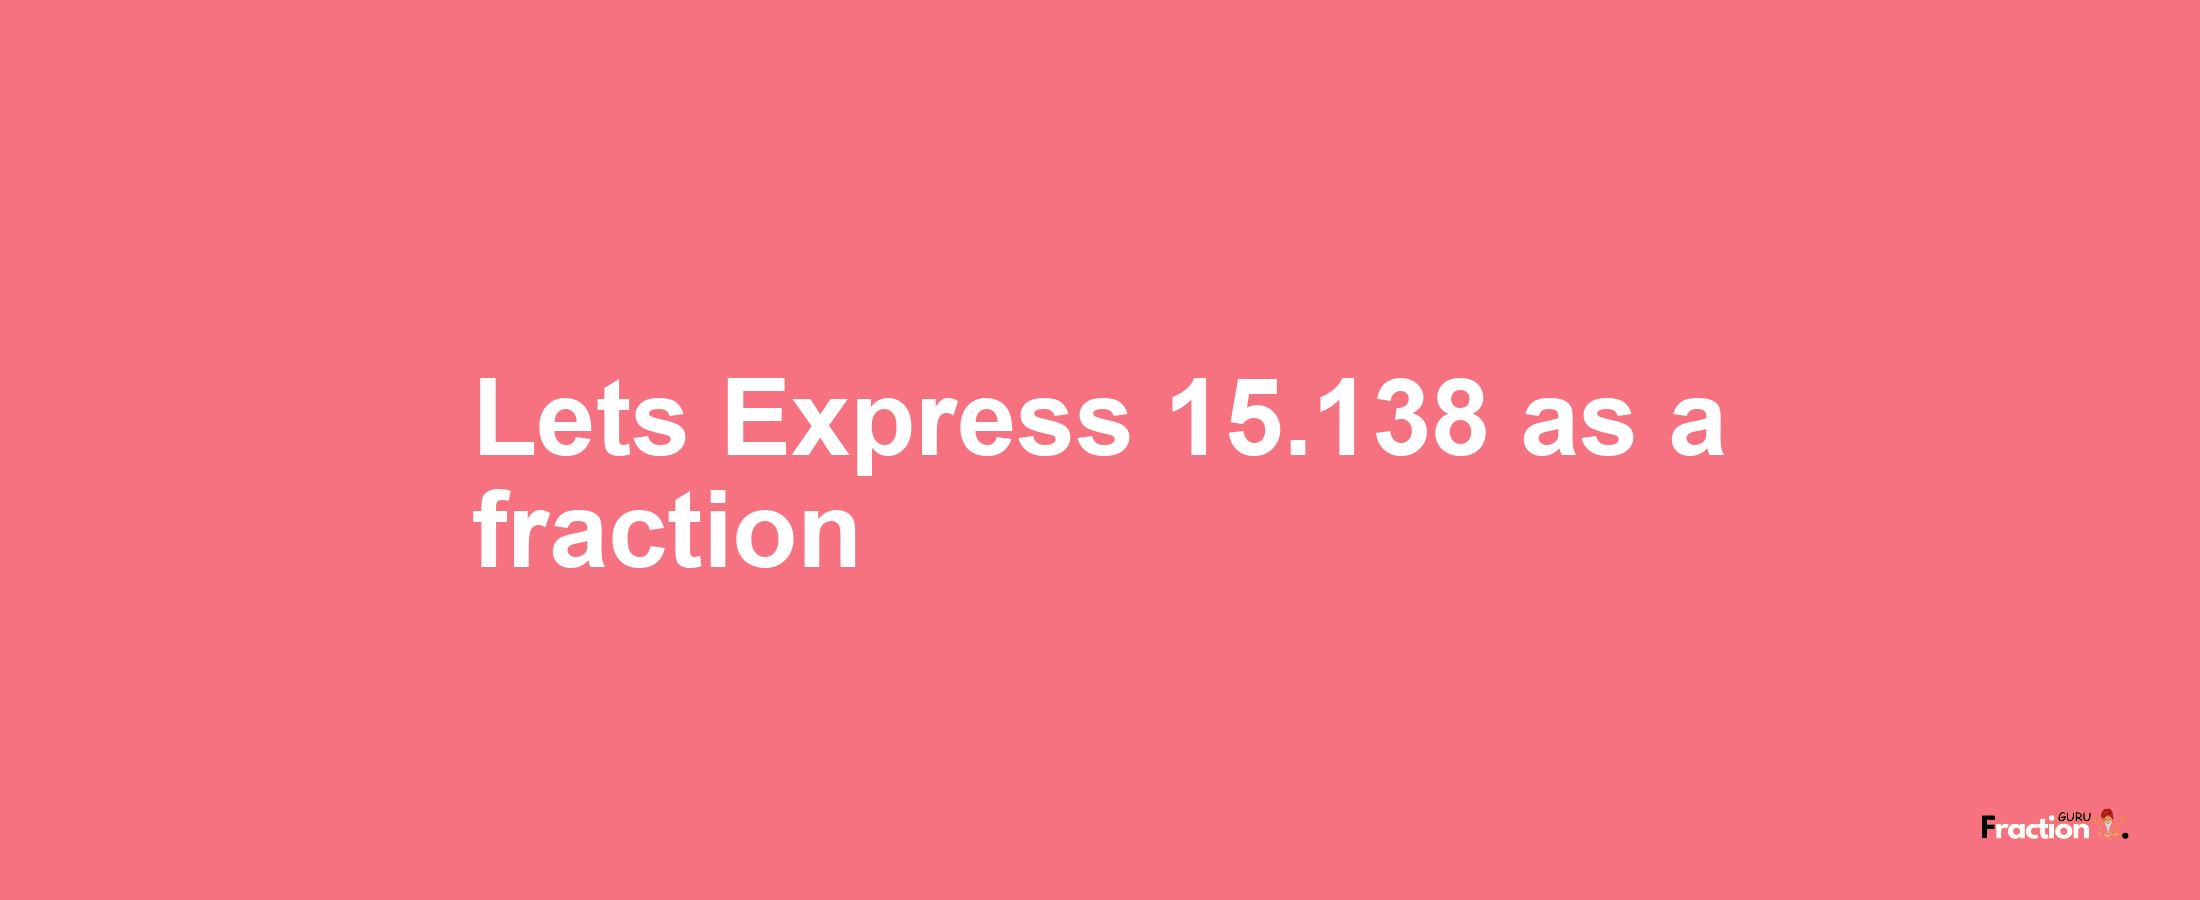 Lets Express 15.138 as afraction